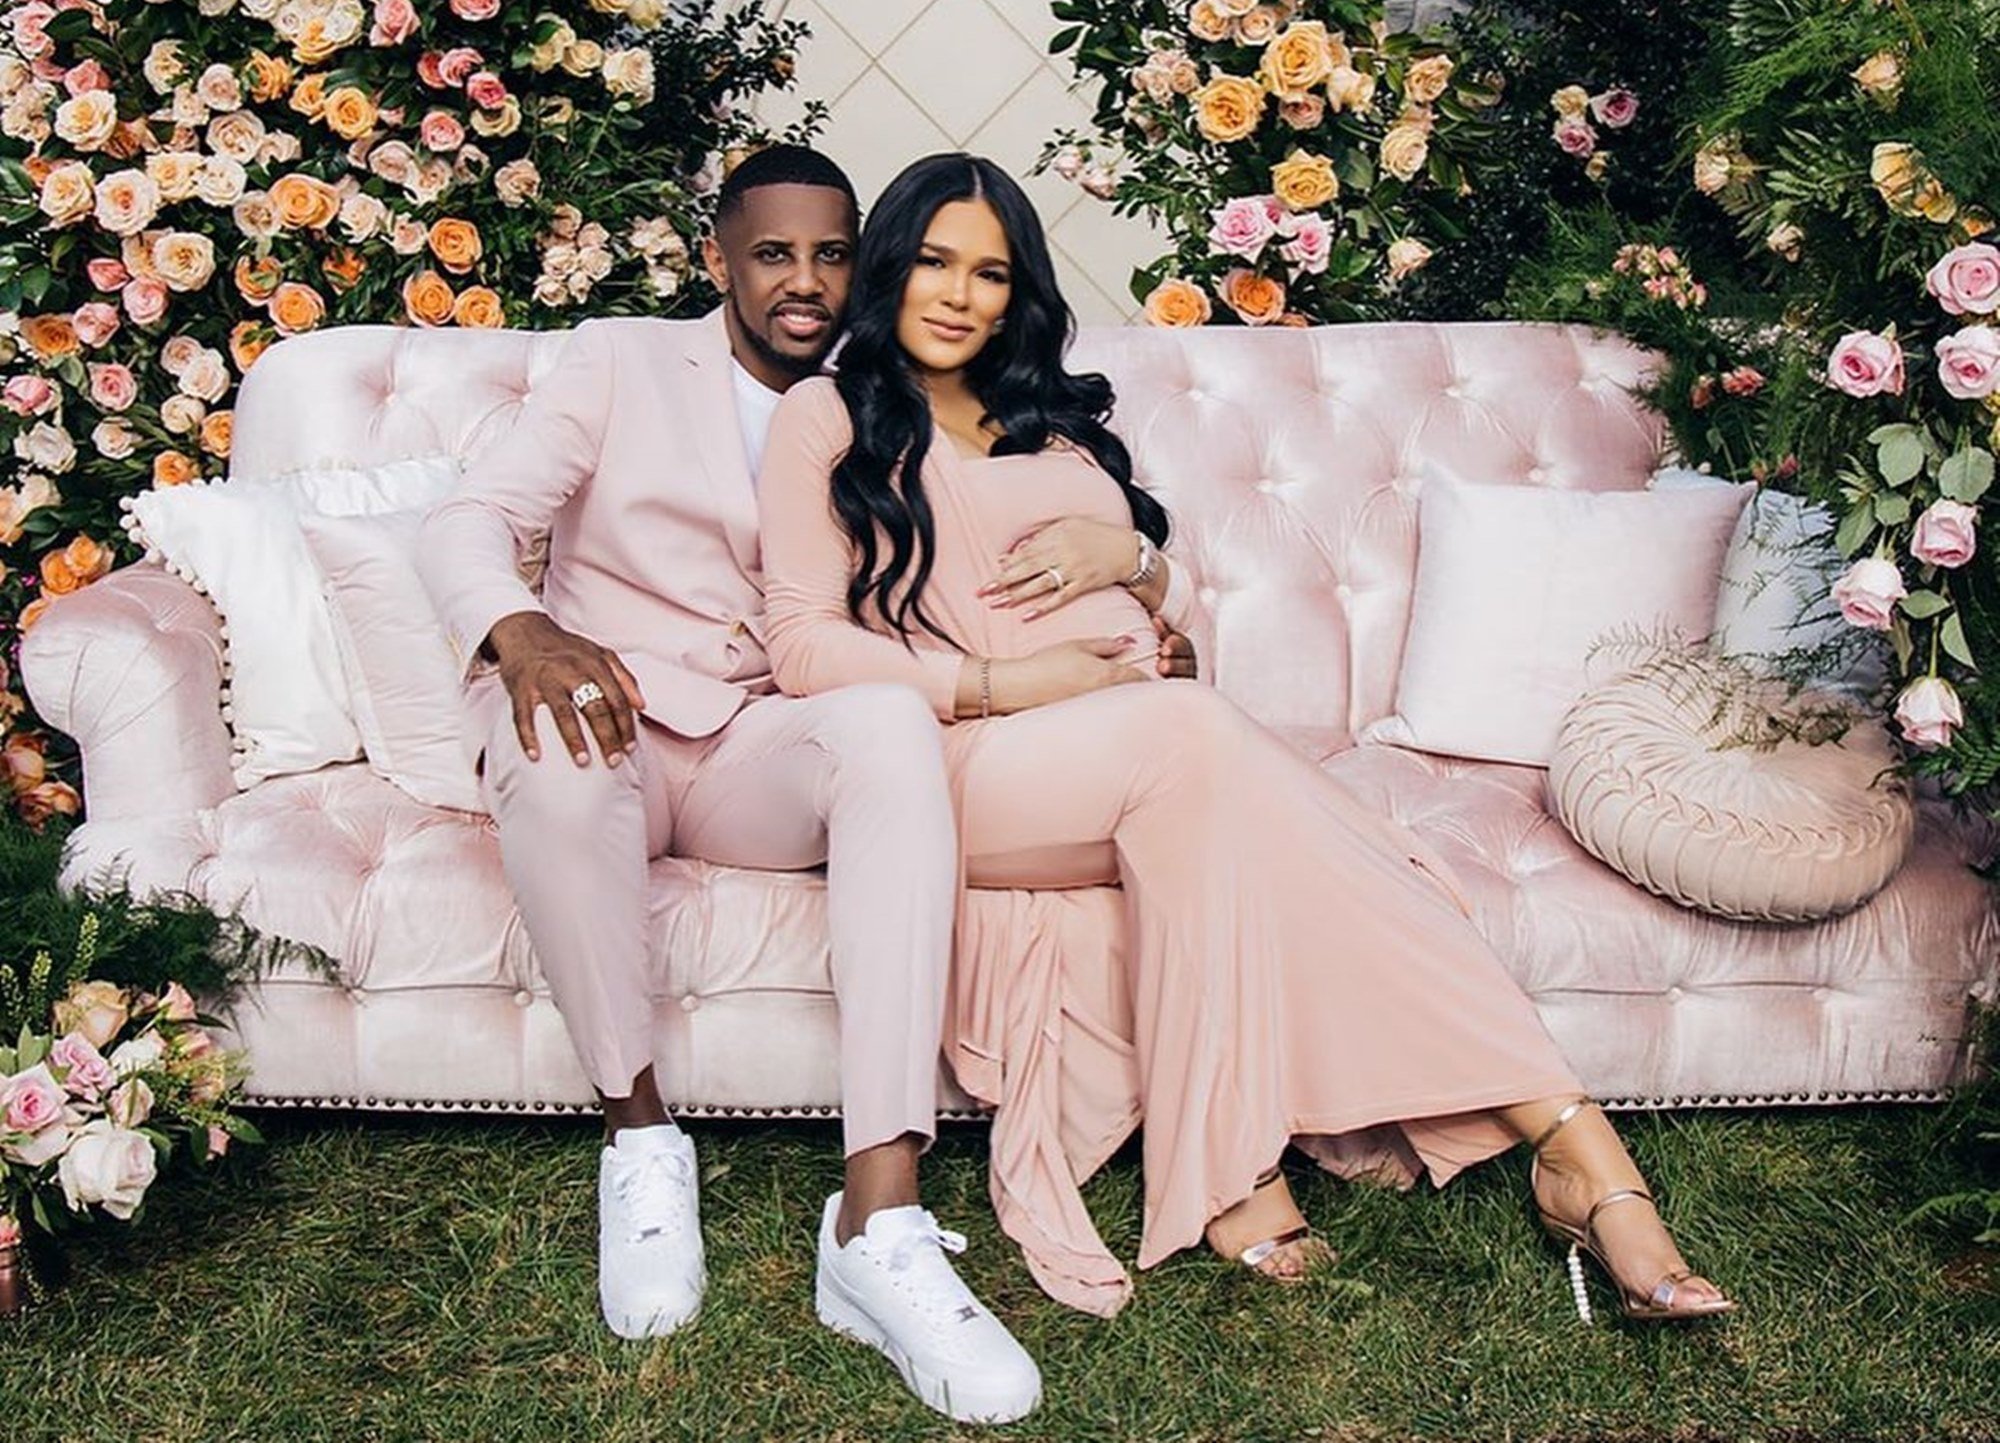 Emily B Reveals New Photo Of Her And Fabolous’ Daughter And Her Fashions Are Already Epic